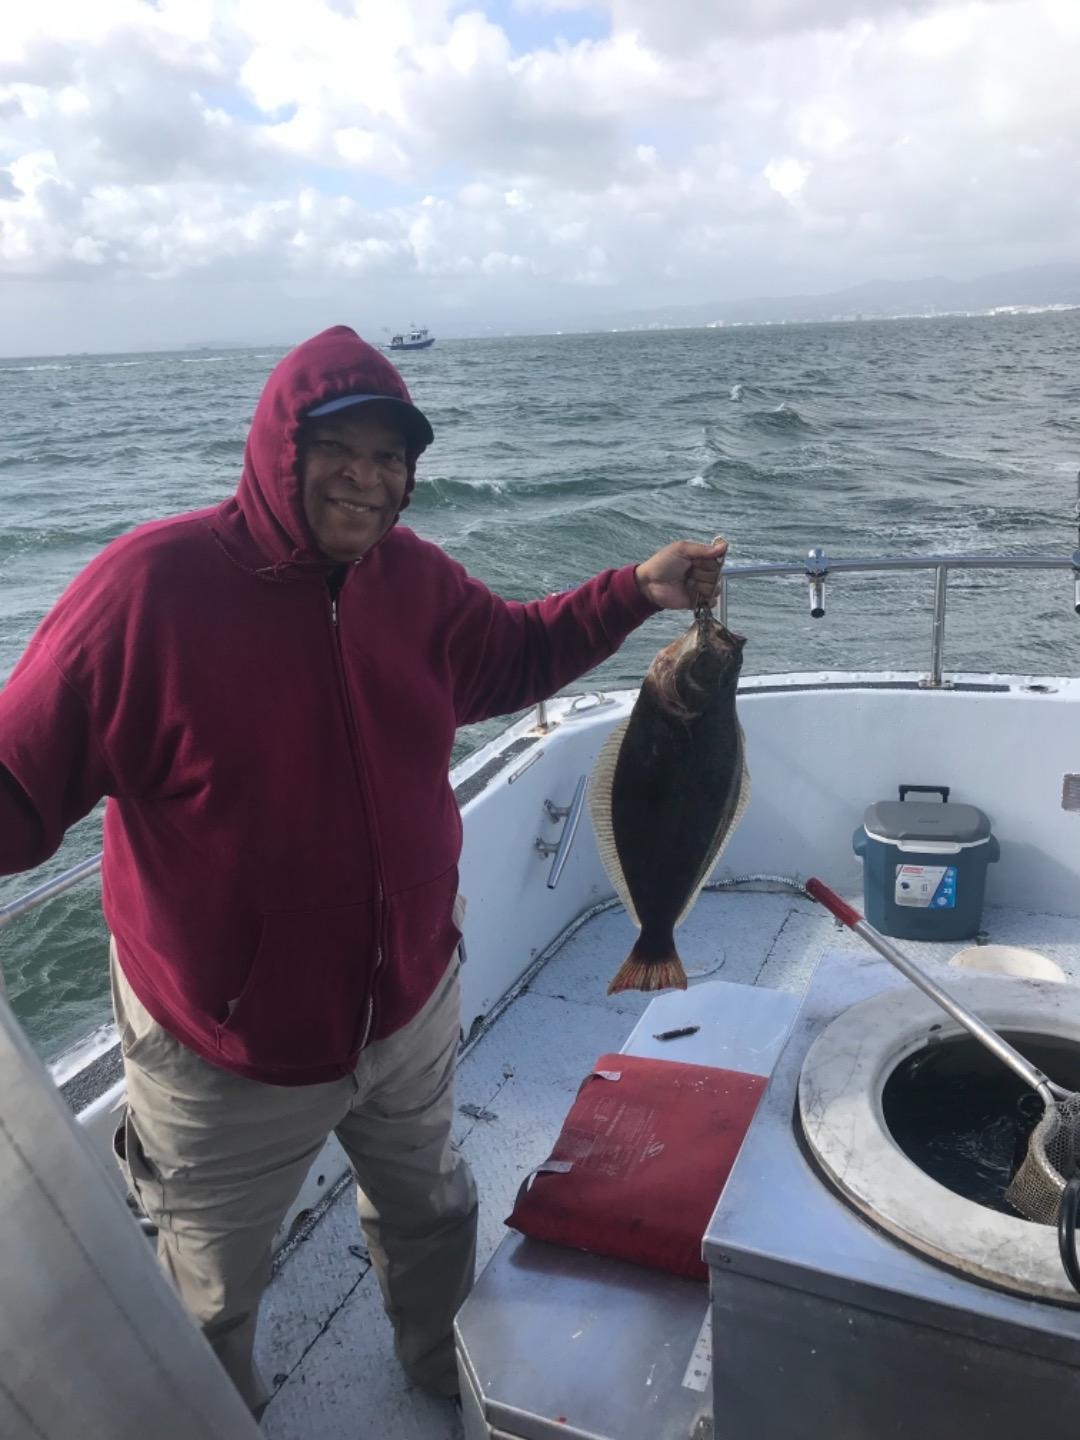 Sunday halibut in the bay